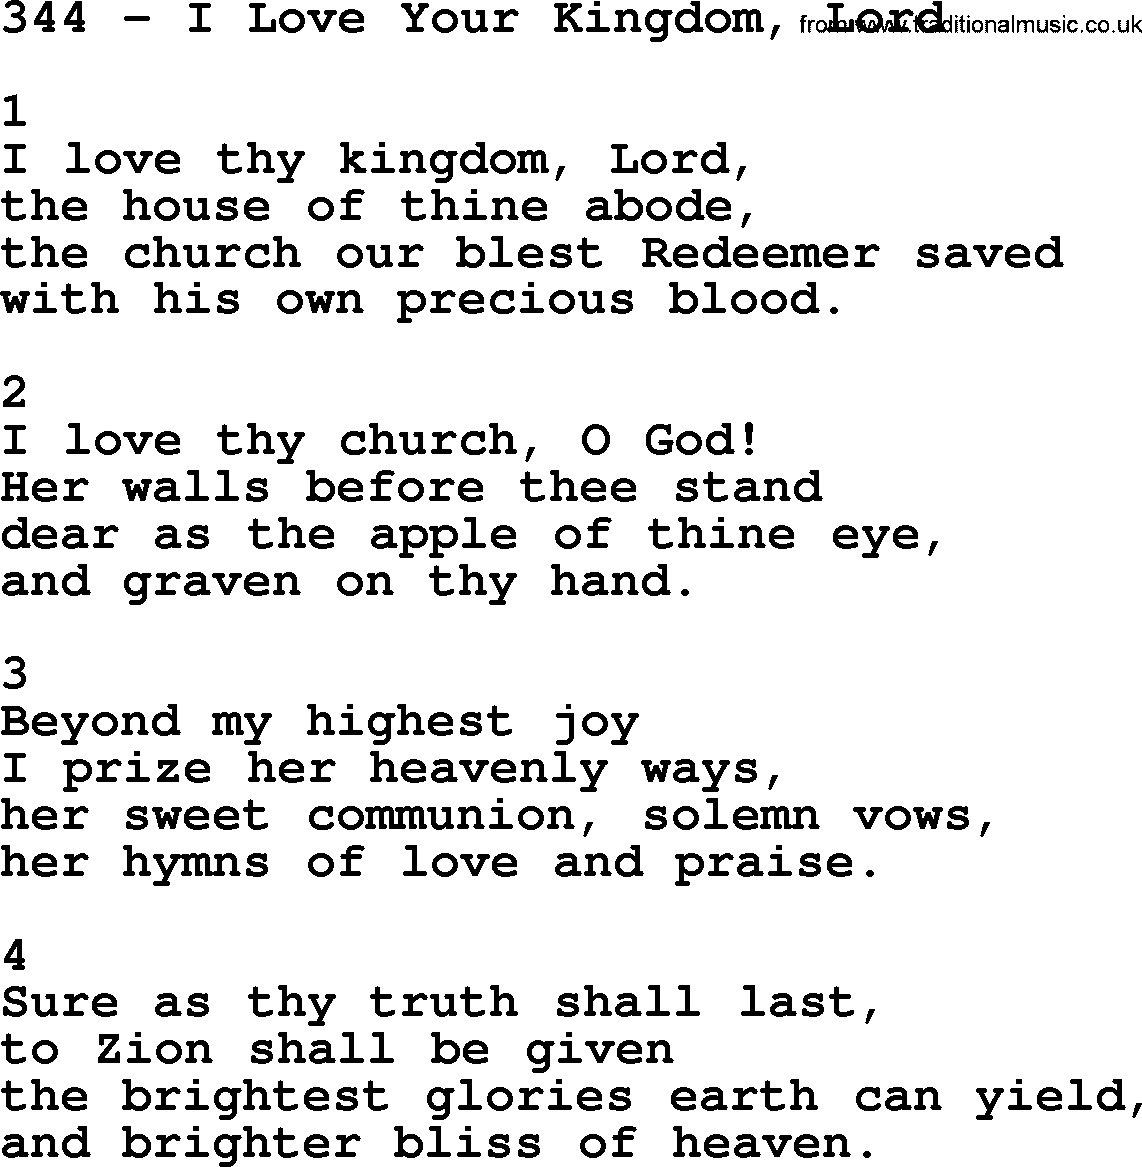 Complete Adventis Hymnal, title: 344-I Love Your Kingdom, Lord, with lyrics, midi, mp3, powerpoints(PPT) and PDF,